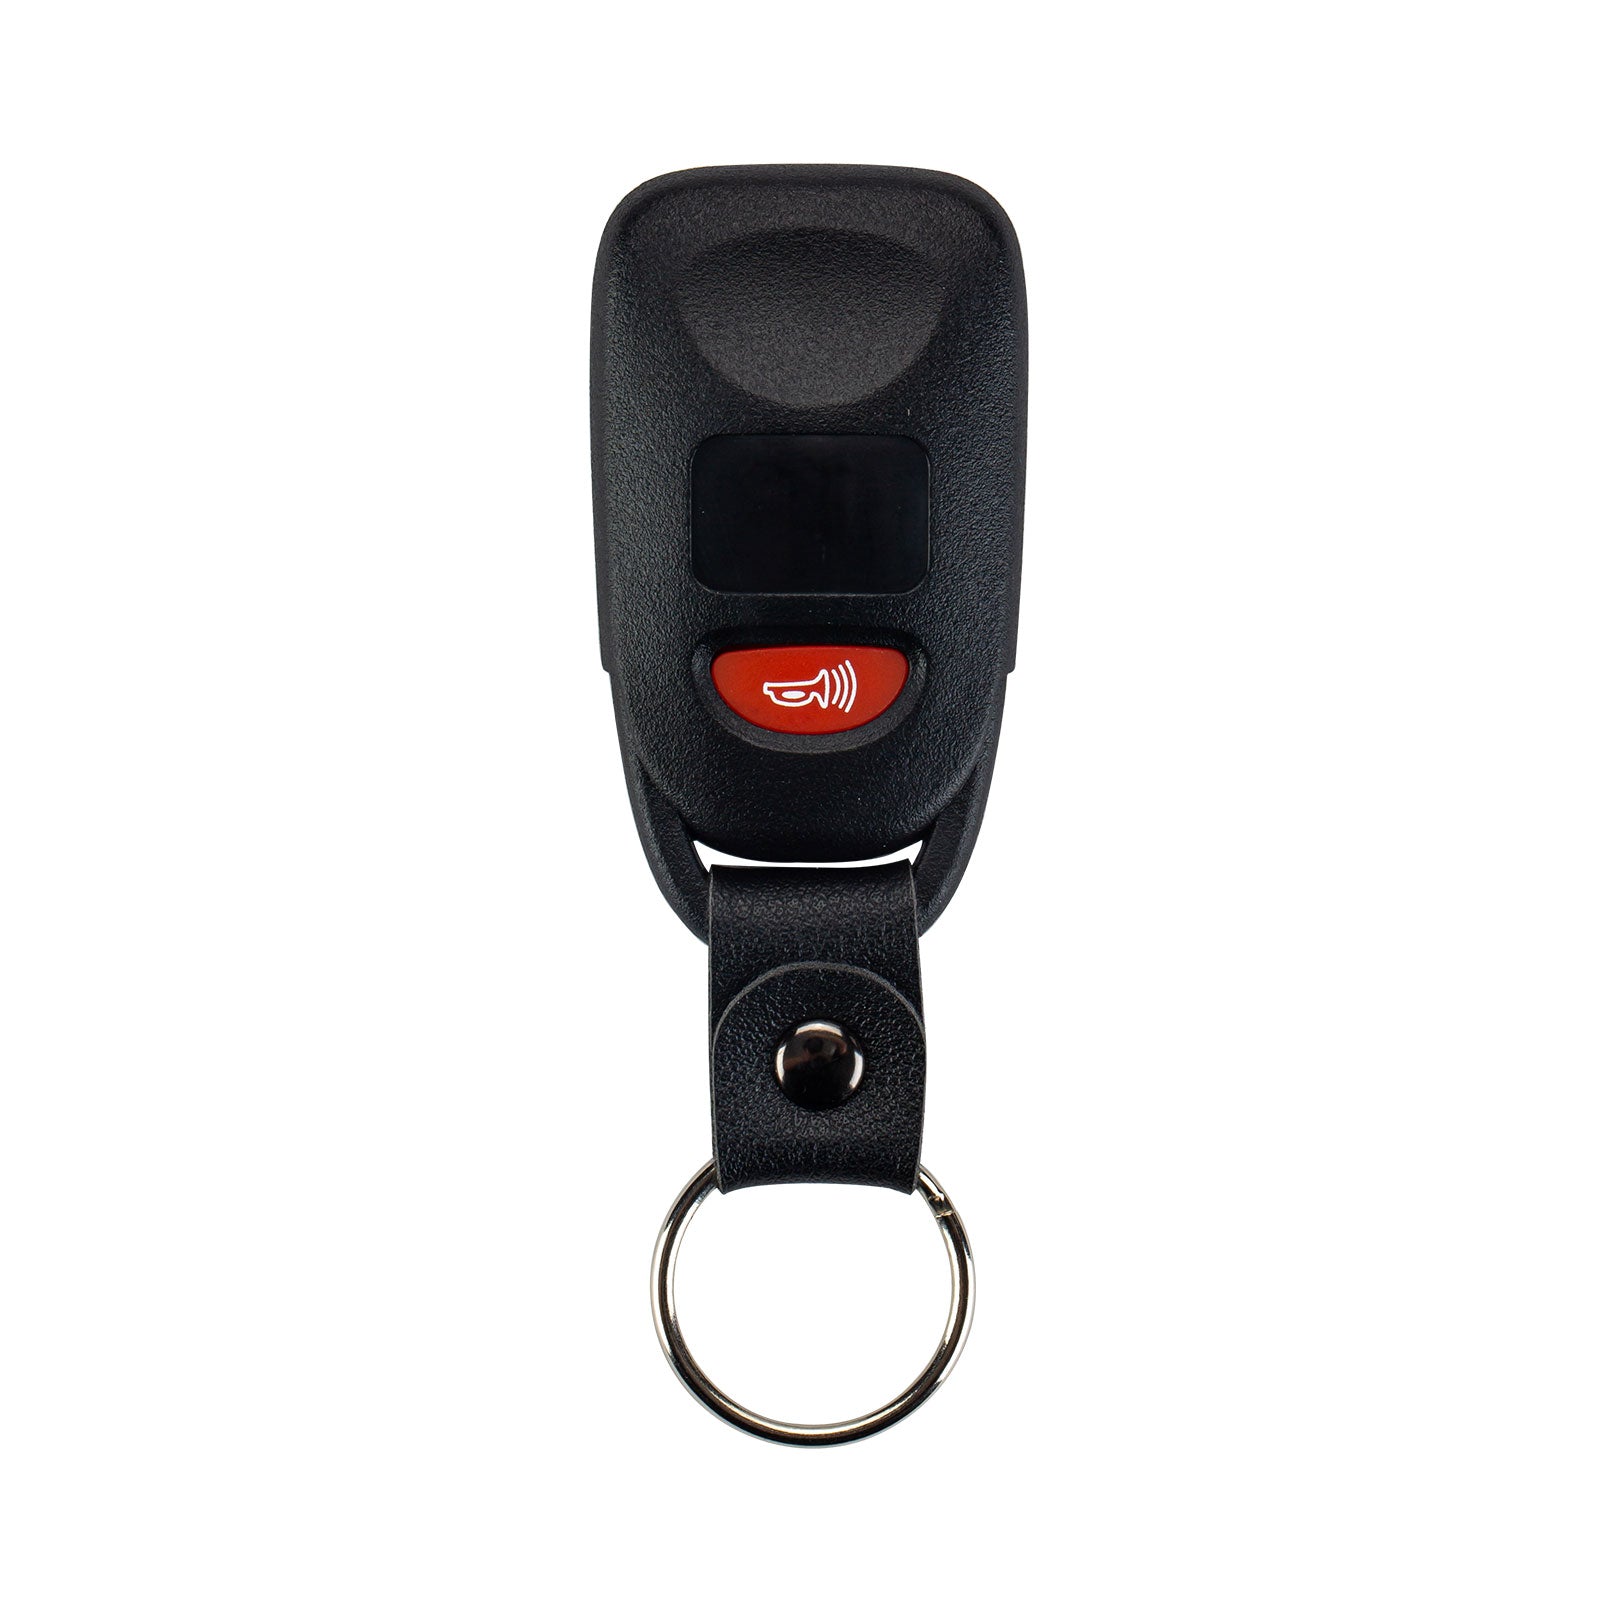 Extra-Partss Remote Car Key Fob Replacement for Hyundai TQ8RKE-4F14 fits 2014 2015 2016 2017 Accent